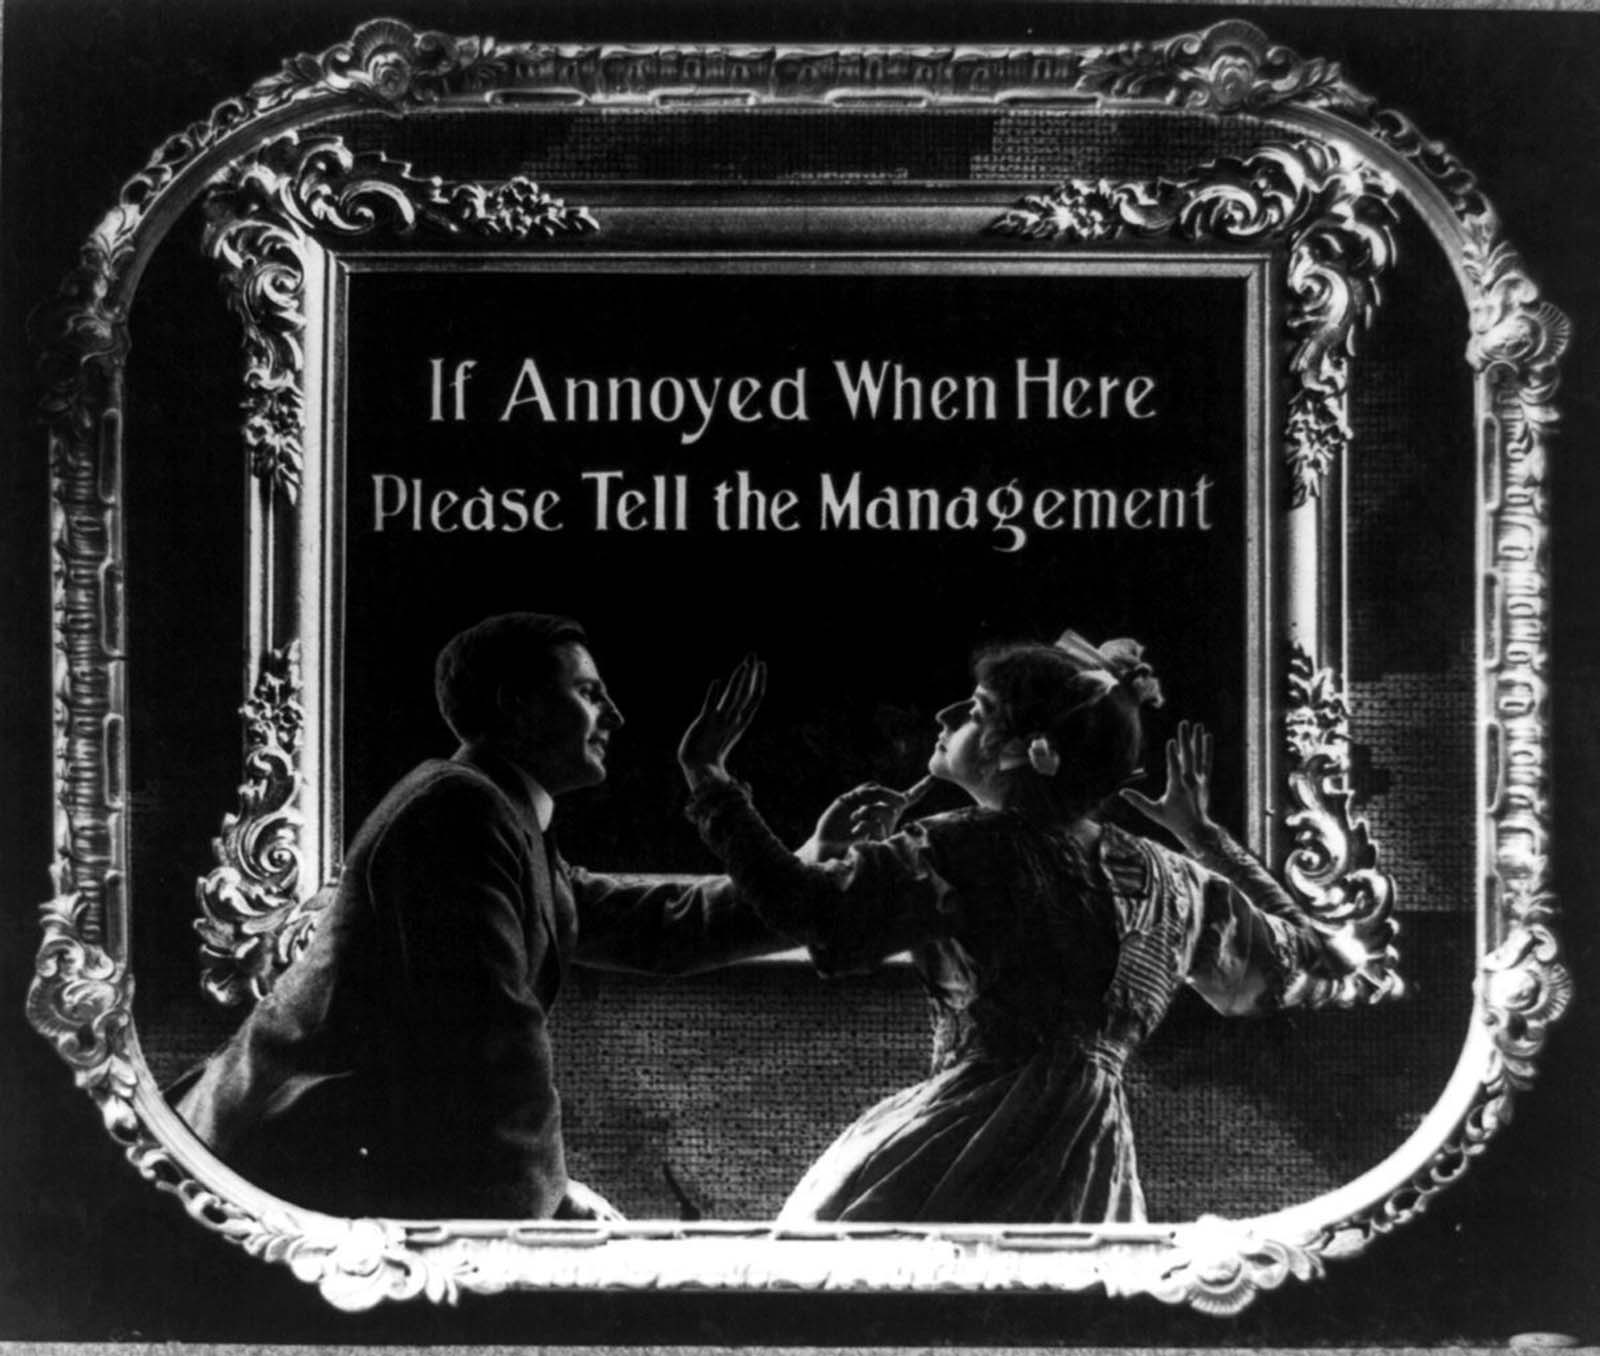 This slider shows a man trying to touch a woman – who is urged to ‘tell the management’ if she is being harassed.